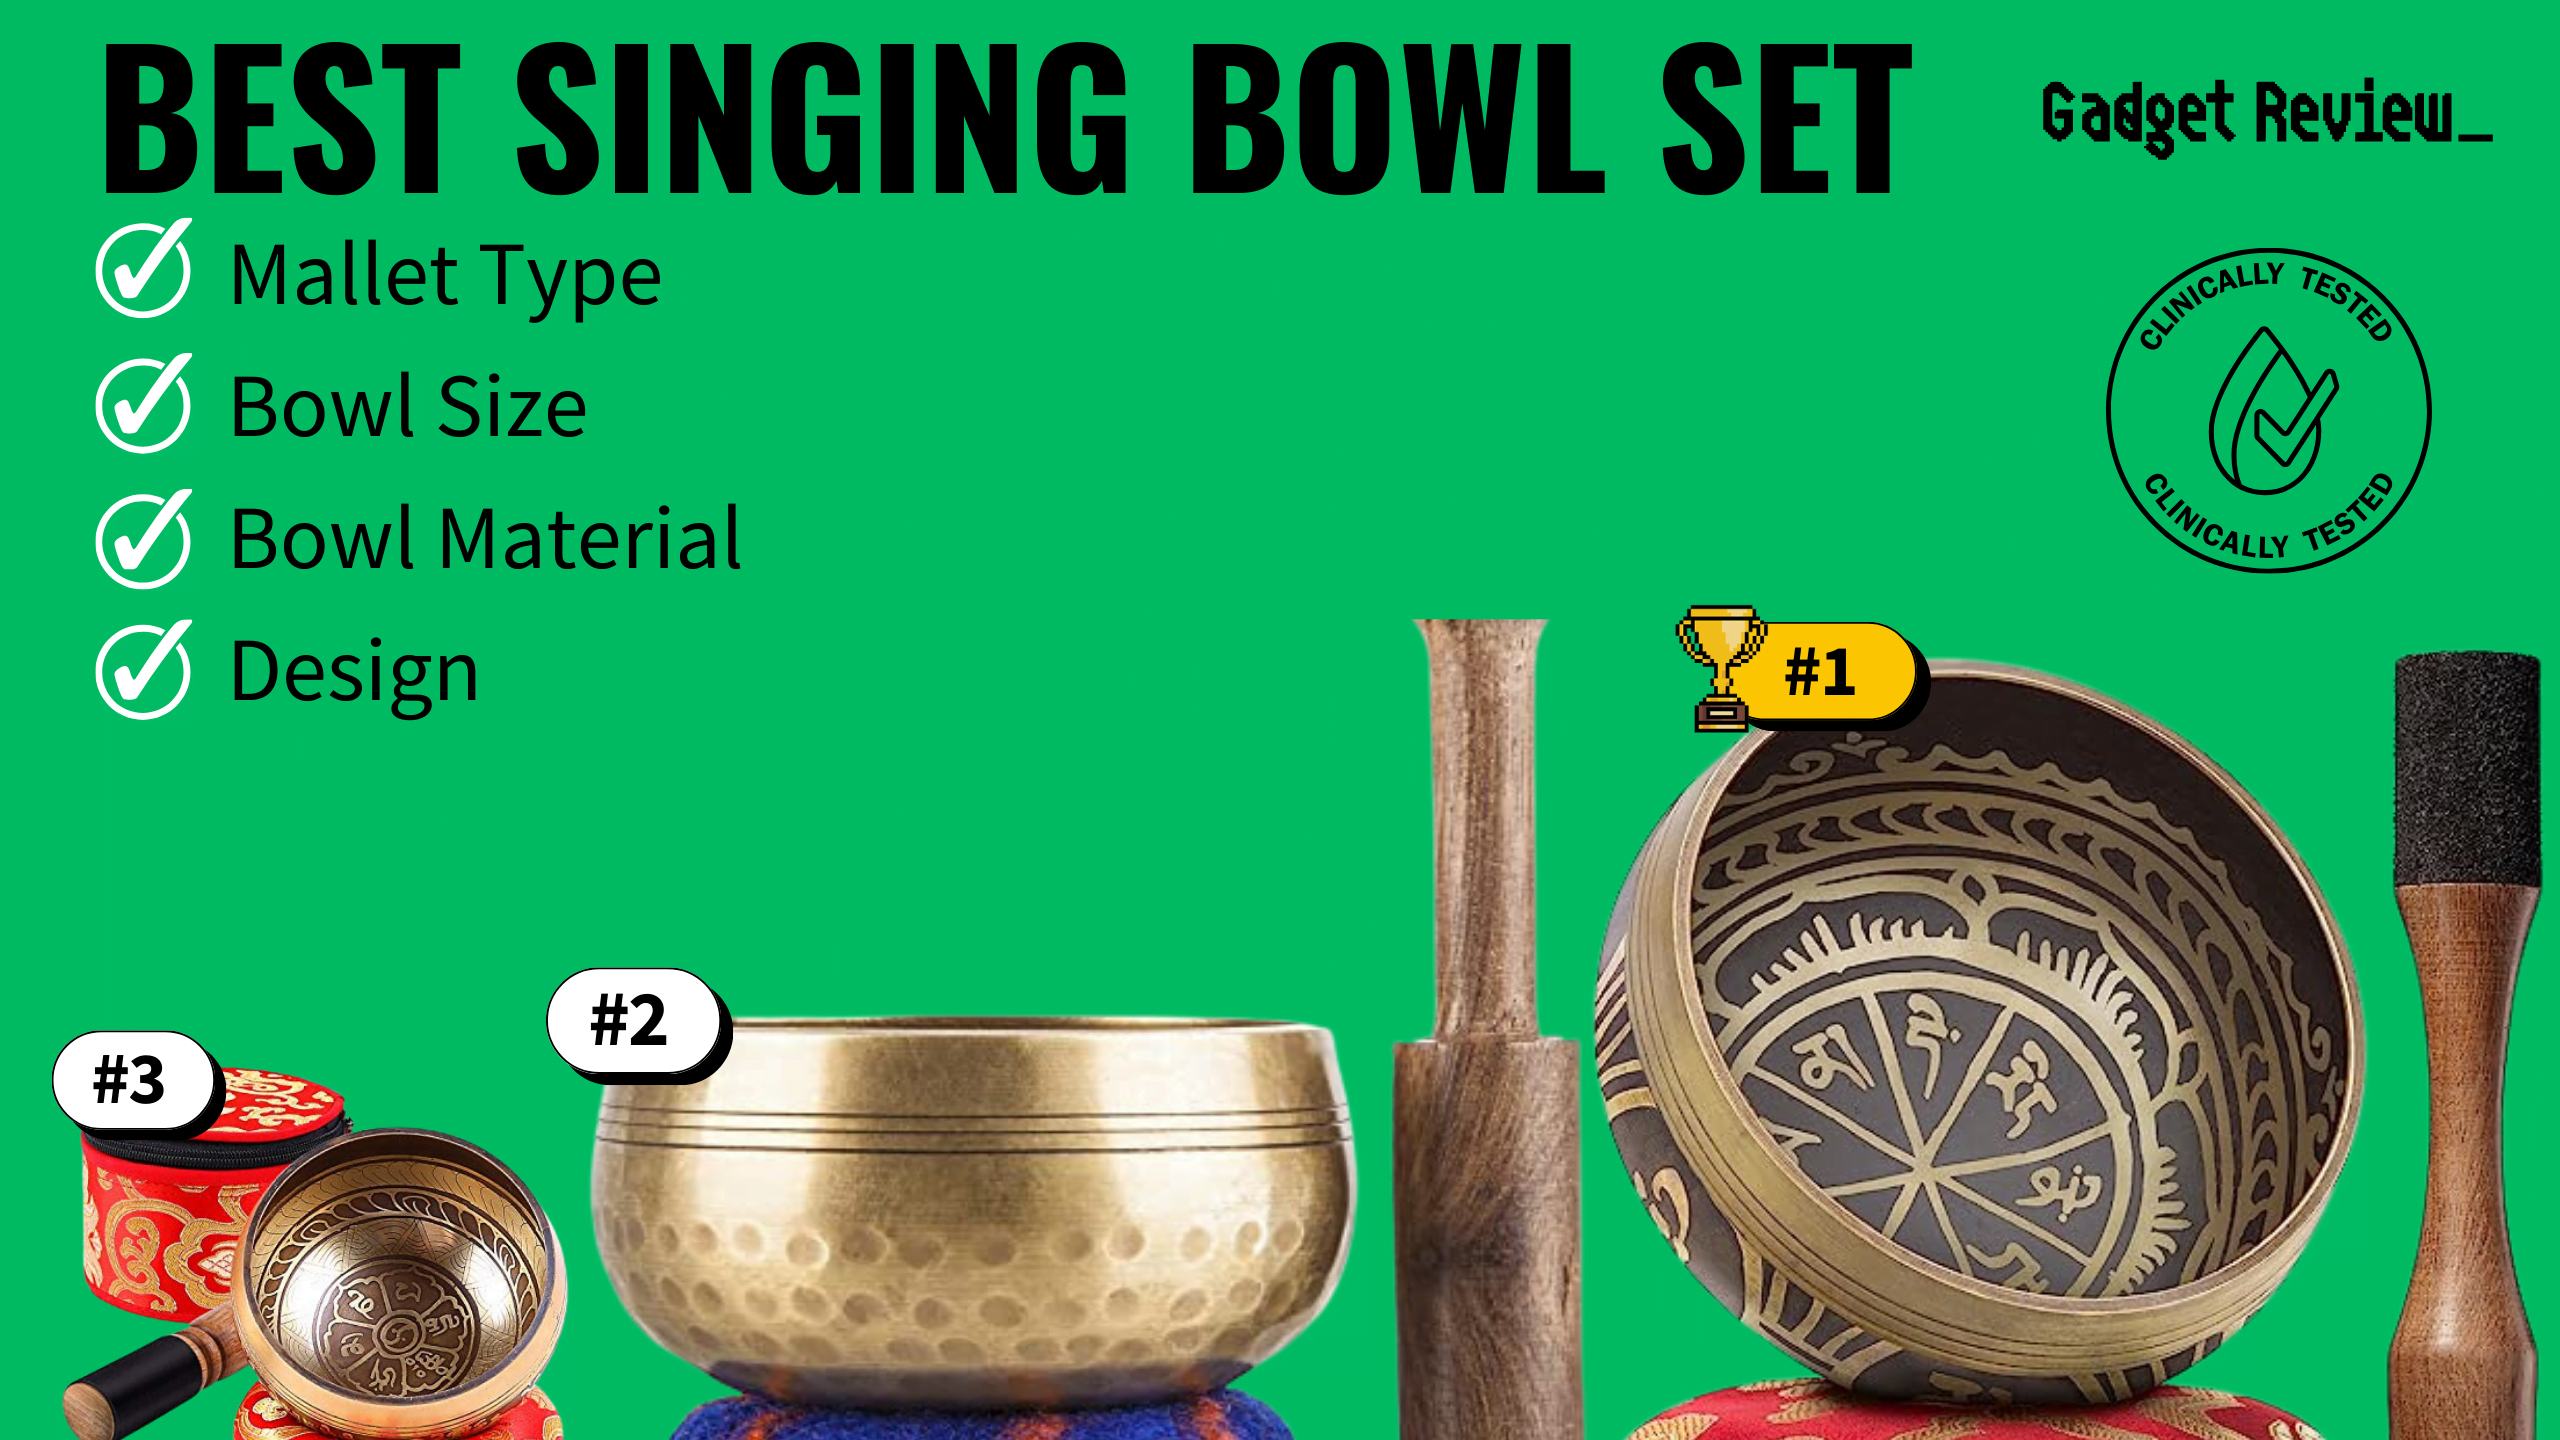 best singing bowl set featured image that shows the top three best music & recording gear models